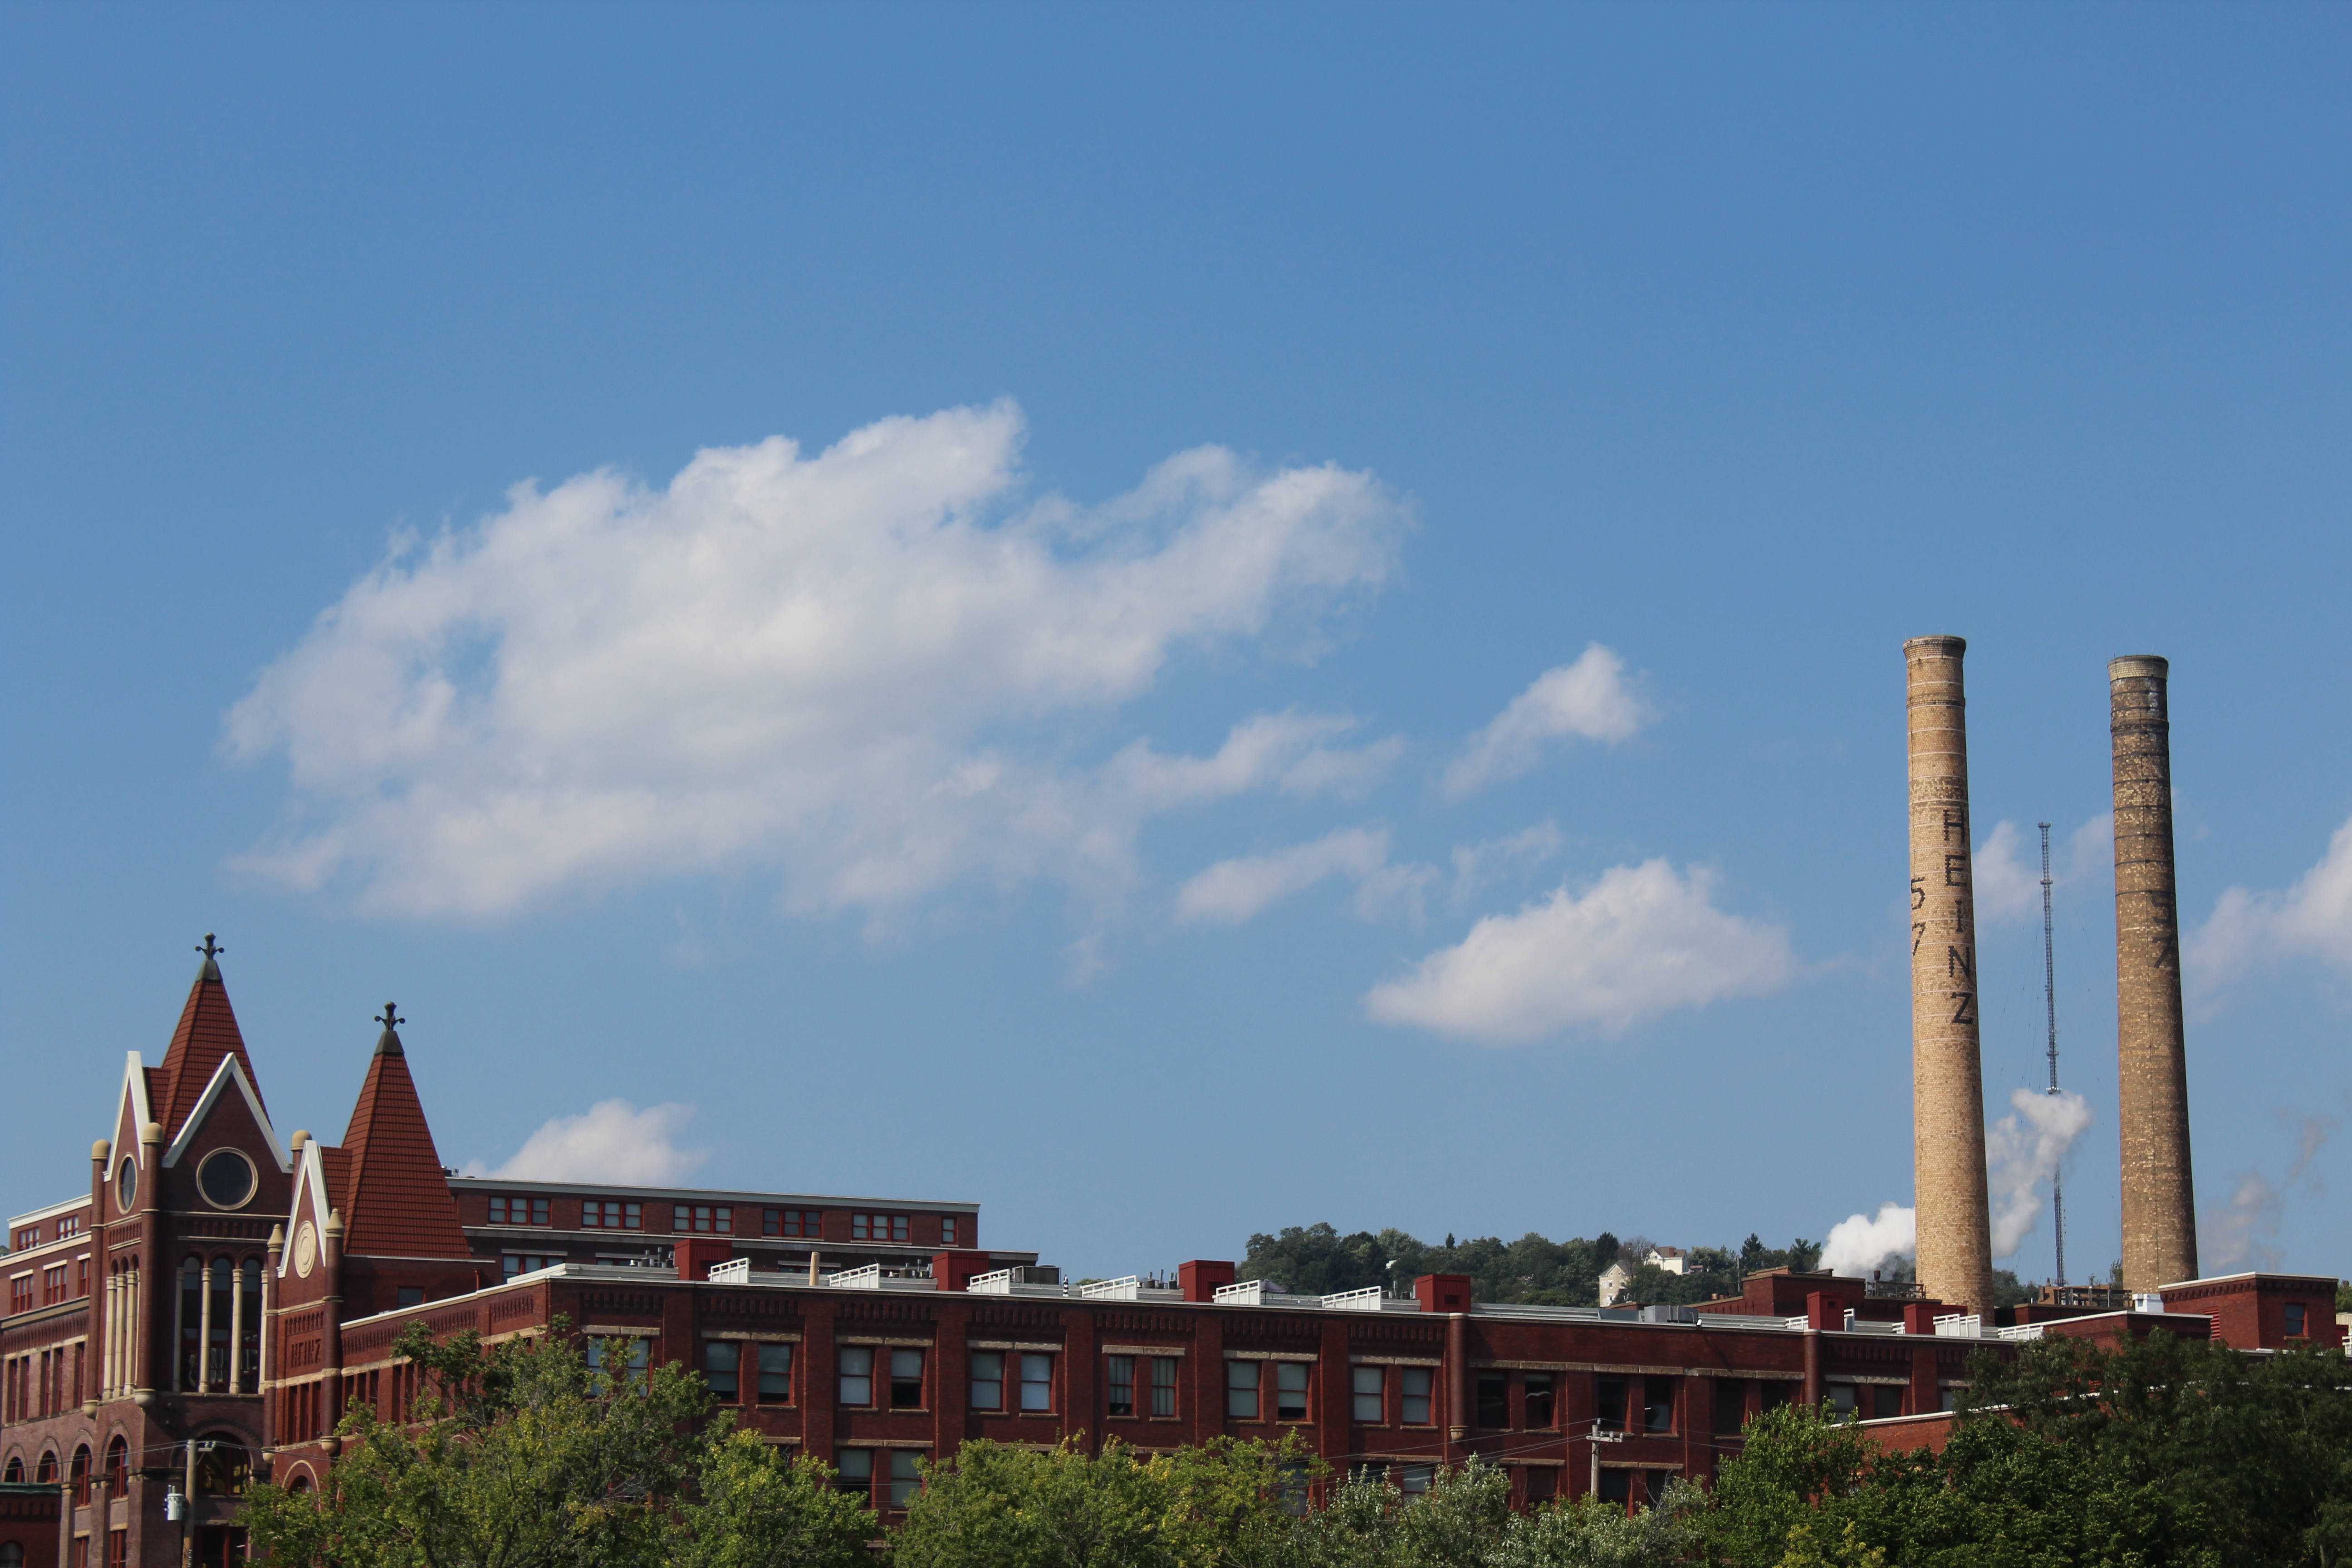 Smokestacks peek out over the top of a brick building. Taken by Jenalee Janes.